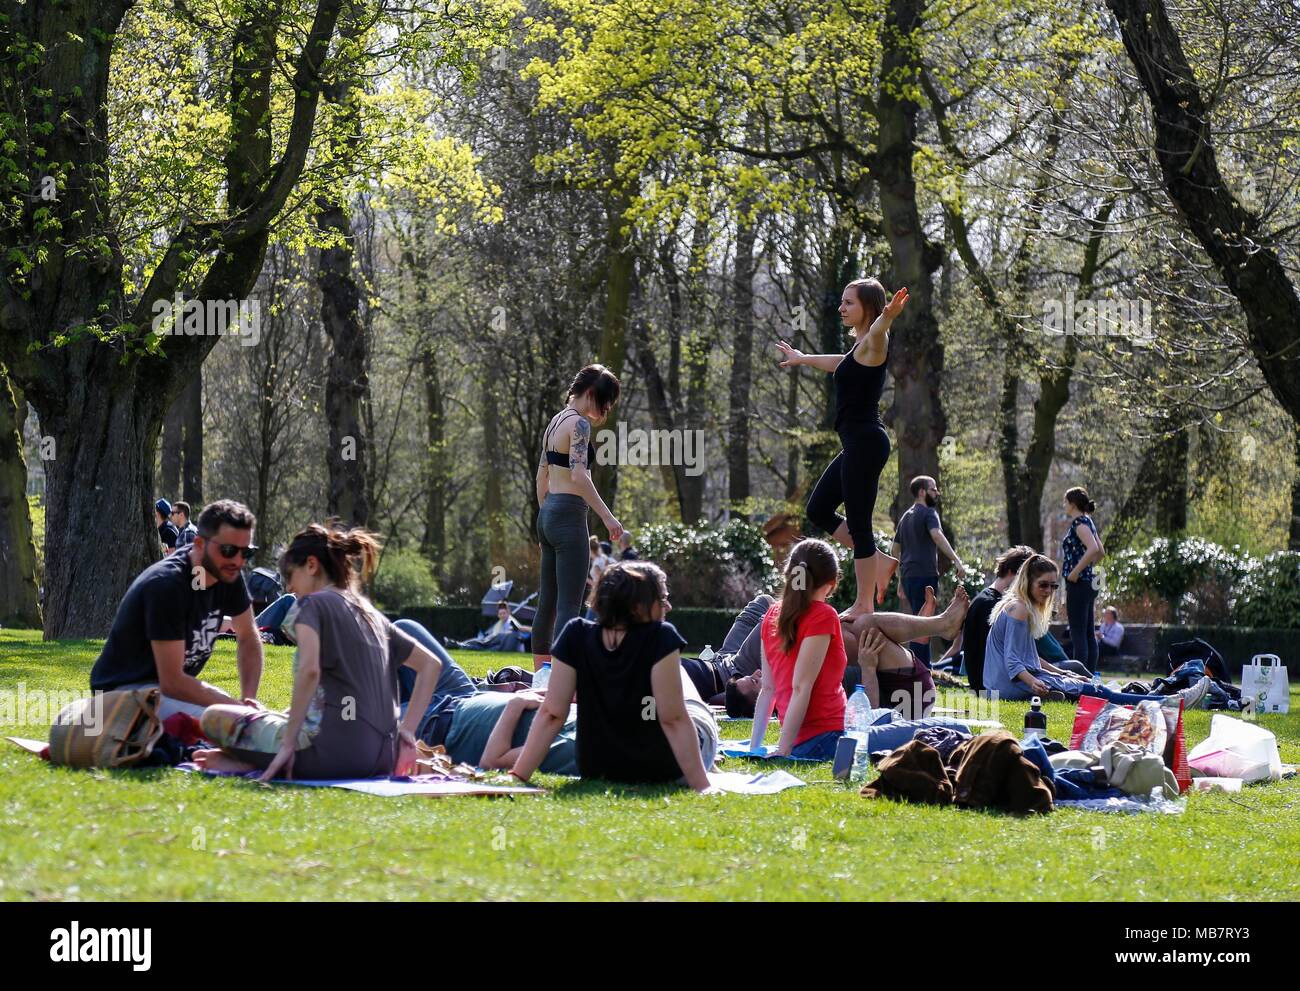 Brussels, Belgium. 8th Apr, 2018. People enjoy sunshine at Cinquantenaire park in Brussels, Belgium, April 8, 2018. As temperature here rose to around 24 degrees Celsius on Sunday, a lot of people went outdoors to enjoy sunshine after a long gloomy winter. Credit: Ye Pingfan/Xinhua/Alamy Live News Stock Photo